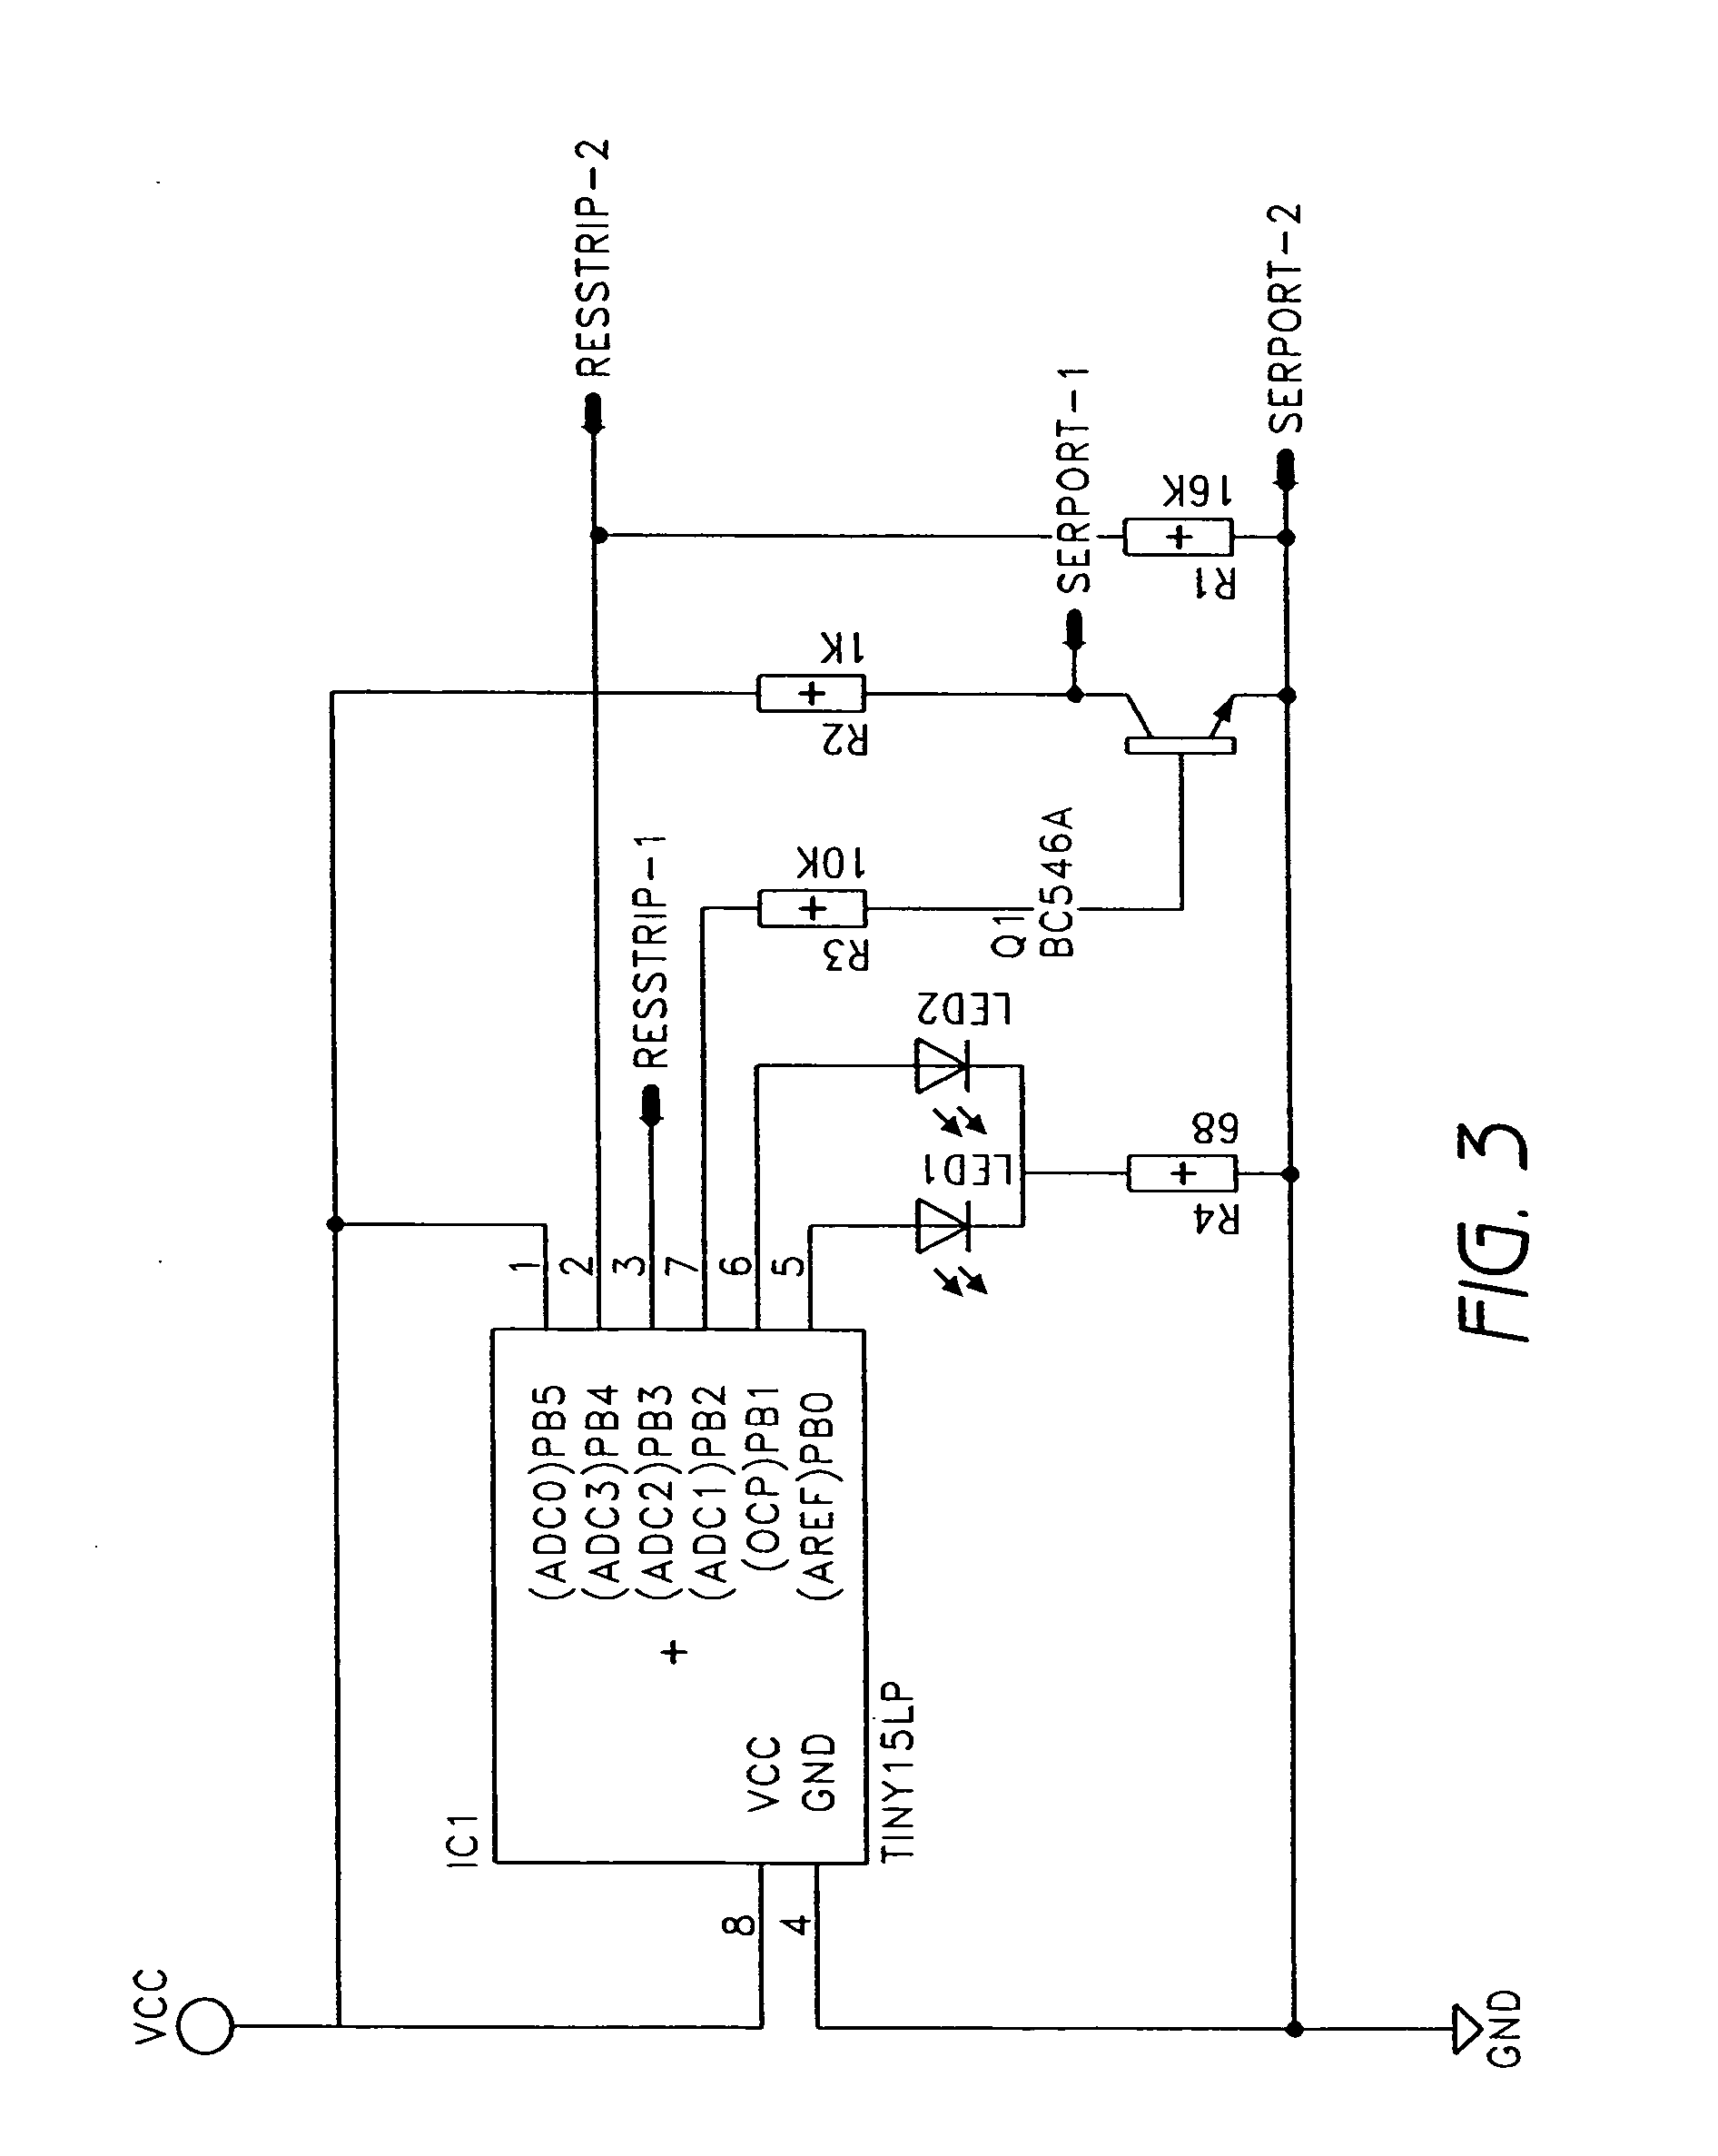 Sensing systems and methods for monitoring gait dynamics